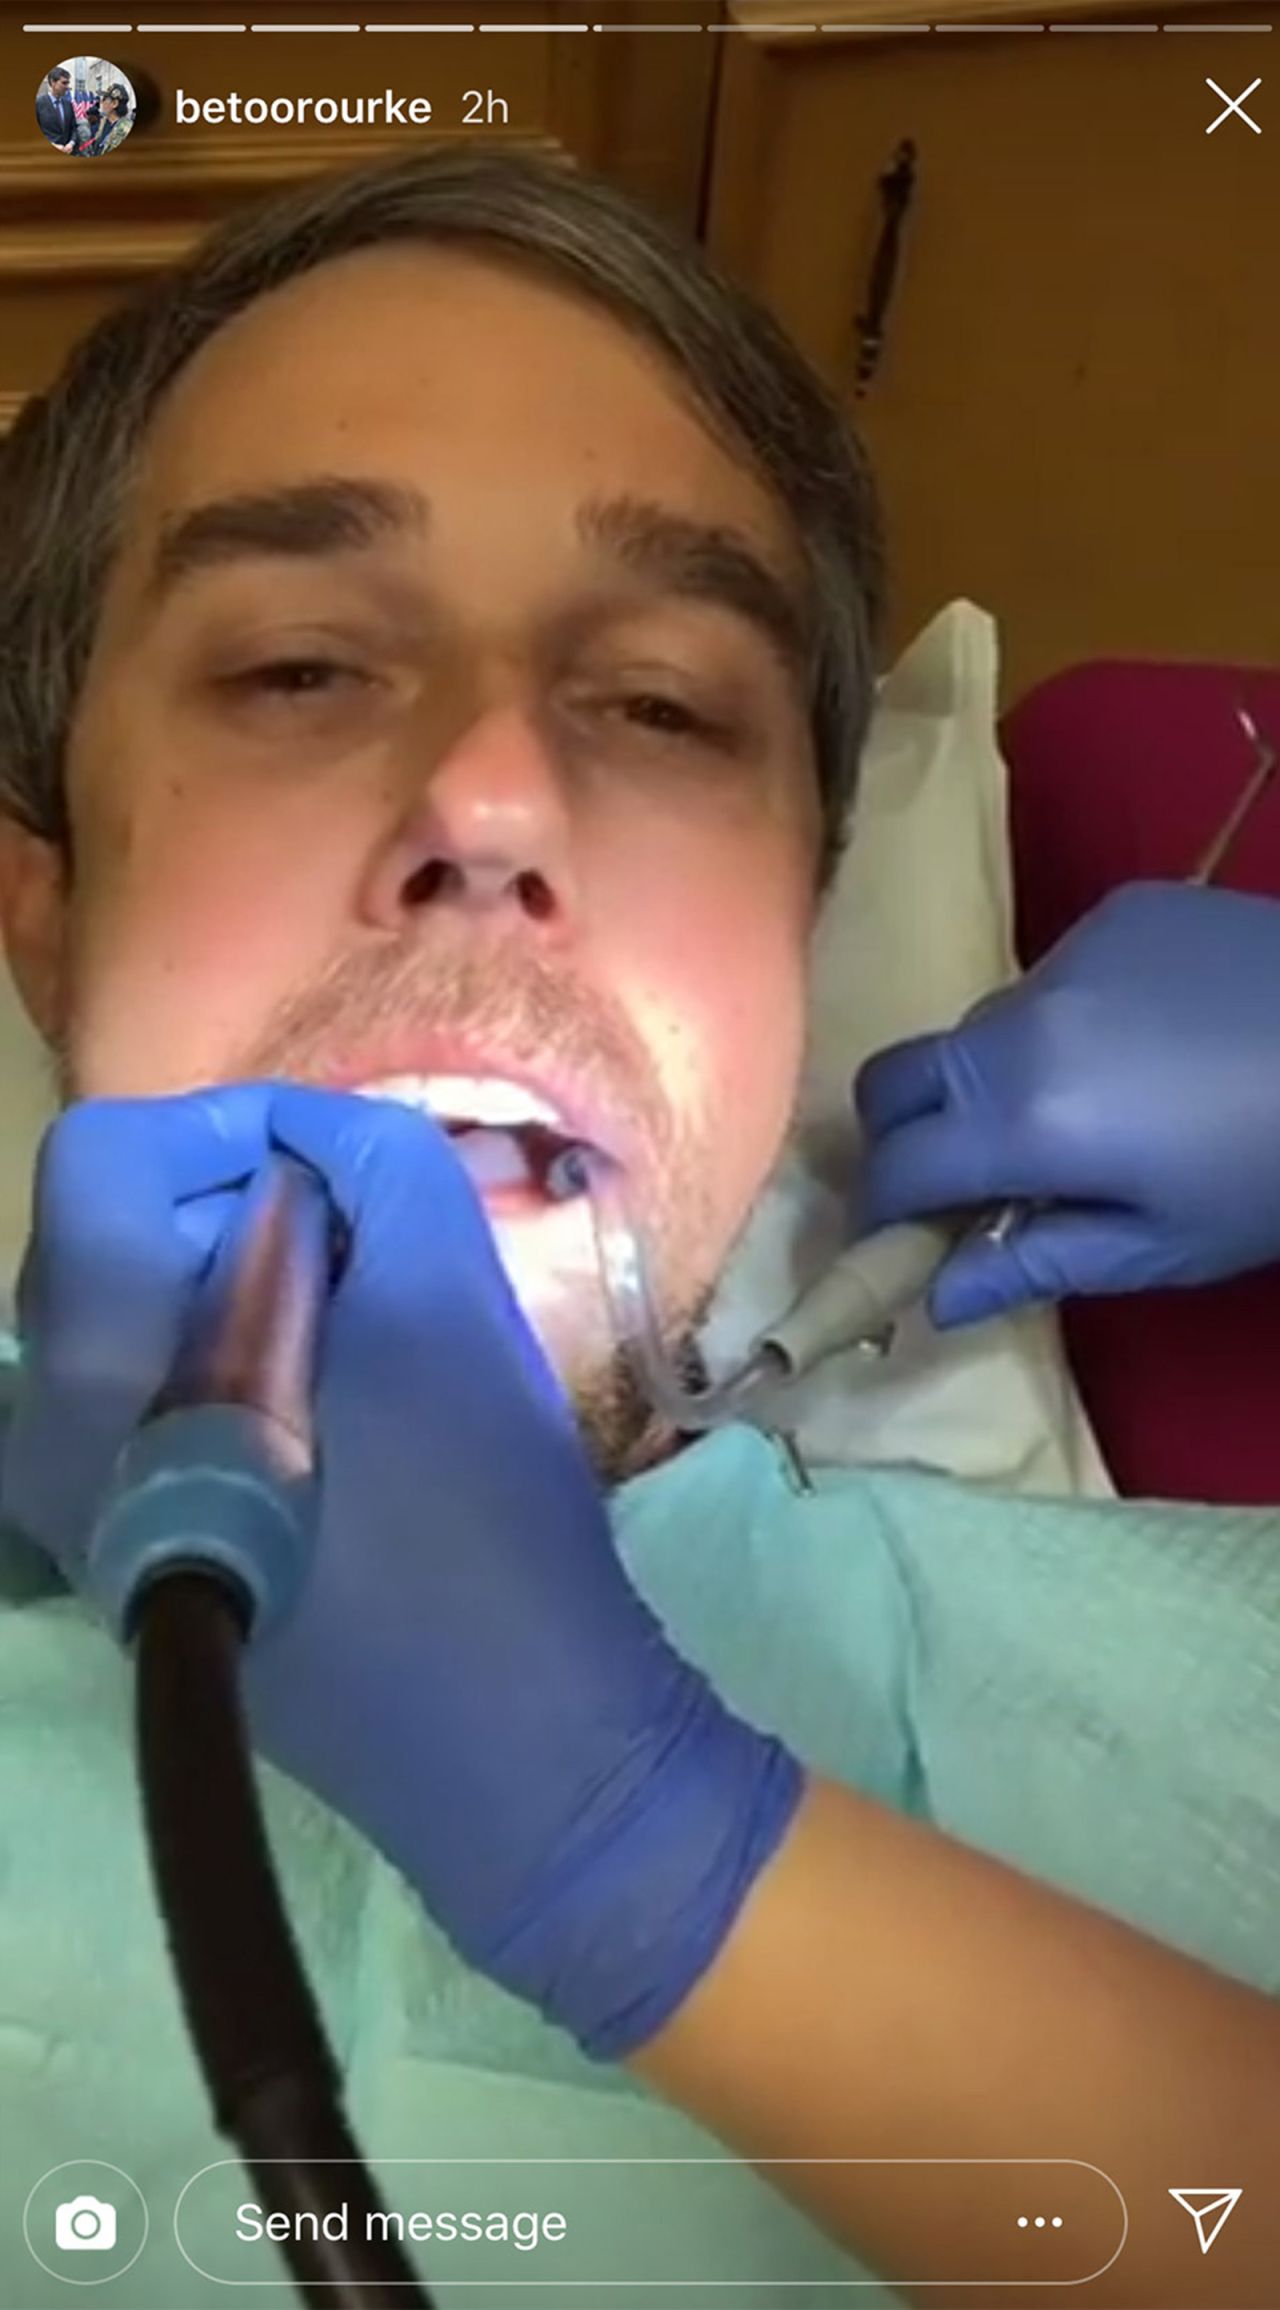 While at the dentist in January 2019, O'Rourke <a href="https://www.cnn.com/2019/01/10/politics/beto-orourke-dentist-instagram/index.html" target="_blank">posted video to Instagram.</a> "We're going to continue our series on the people of the border," he said, introducing his dental hygienist Diana and saying she was "going to tell us a little bit about growing up in El Paso." Diana explained that her mother was from Mexico and her father was from the United States. She said she was born in El Paso and that her neighborhood helped her mother study to become a US citizen.